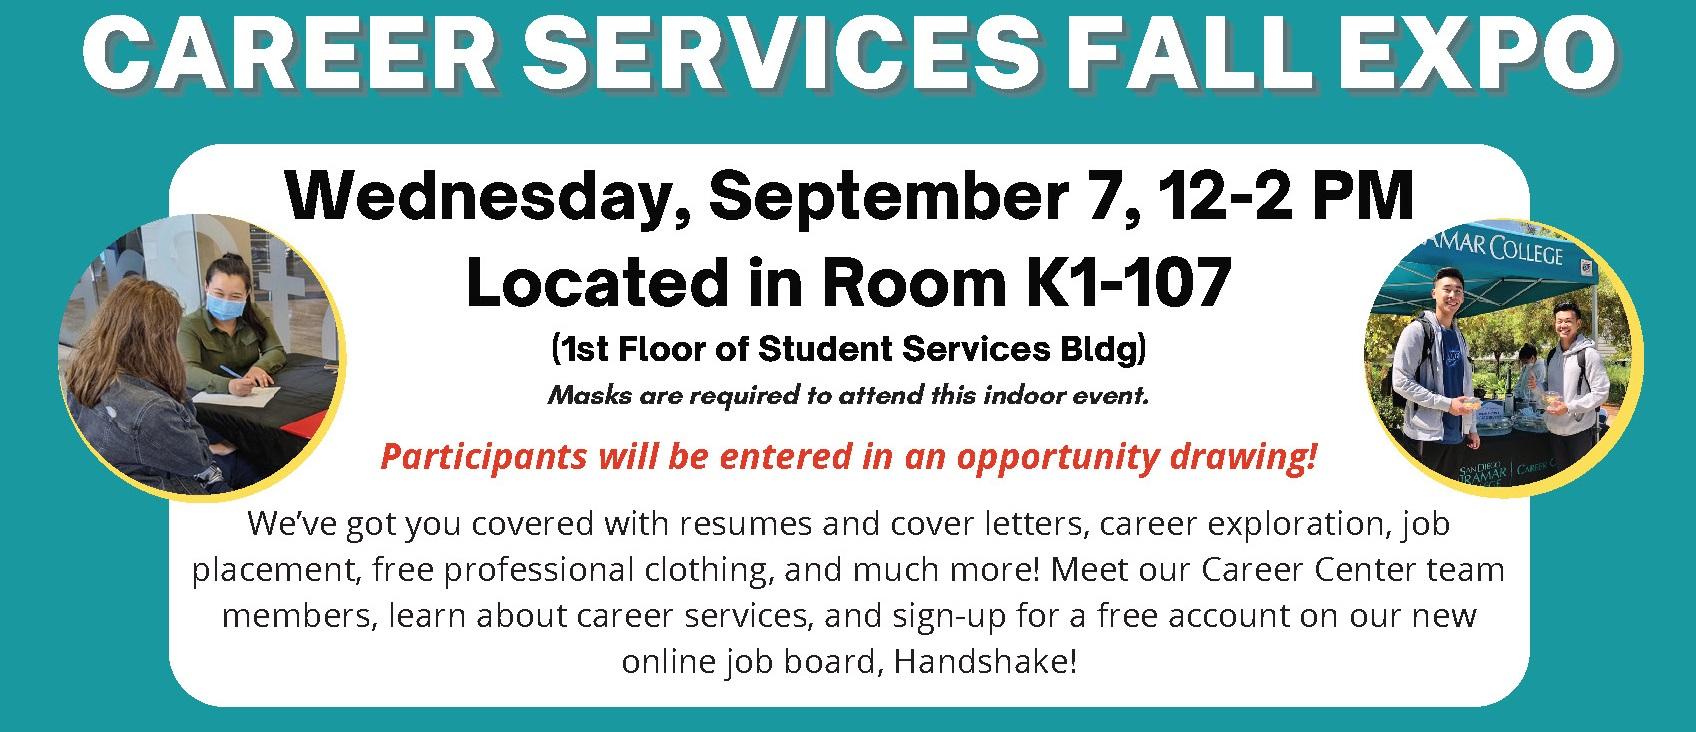 A graphic with text that reads, "Career Services Fall Expo. Wednesday, September 7, 12:00–2:00 PM. Located in room K1-107 (first floor of student services building). Masks are required to attend this indoor event. Participants will be entered in an opportunity drawing! We've got you covered with resumes and cover letters, career exploration, job placement, free professional clothing, and much more! Meet our Career Center team members, learn about career services, and sign-up for an account on Handshake."